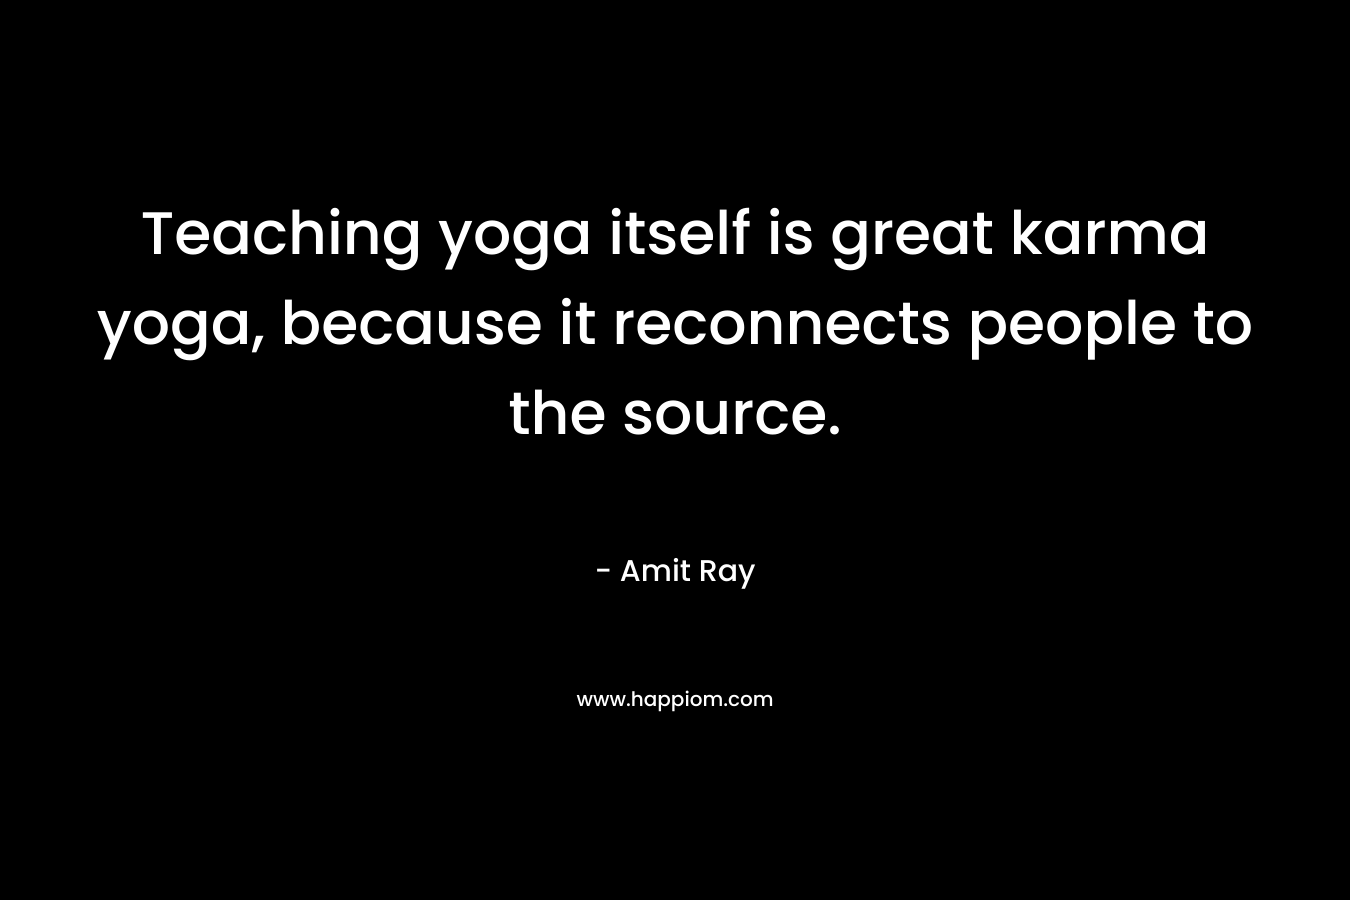 Teaching yoga itself is great karma yoga, because it reconnects people to the source. – Amit Ray